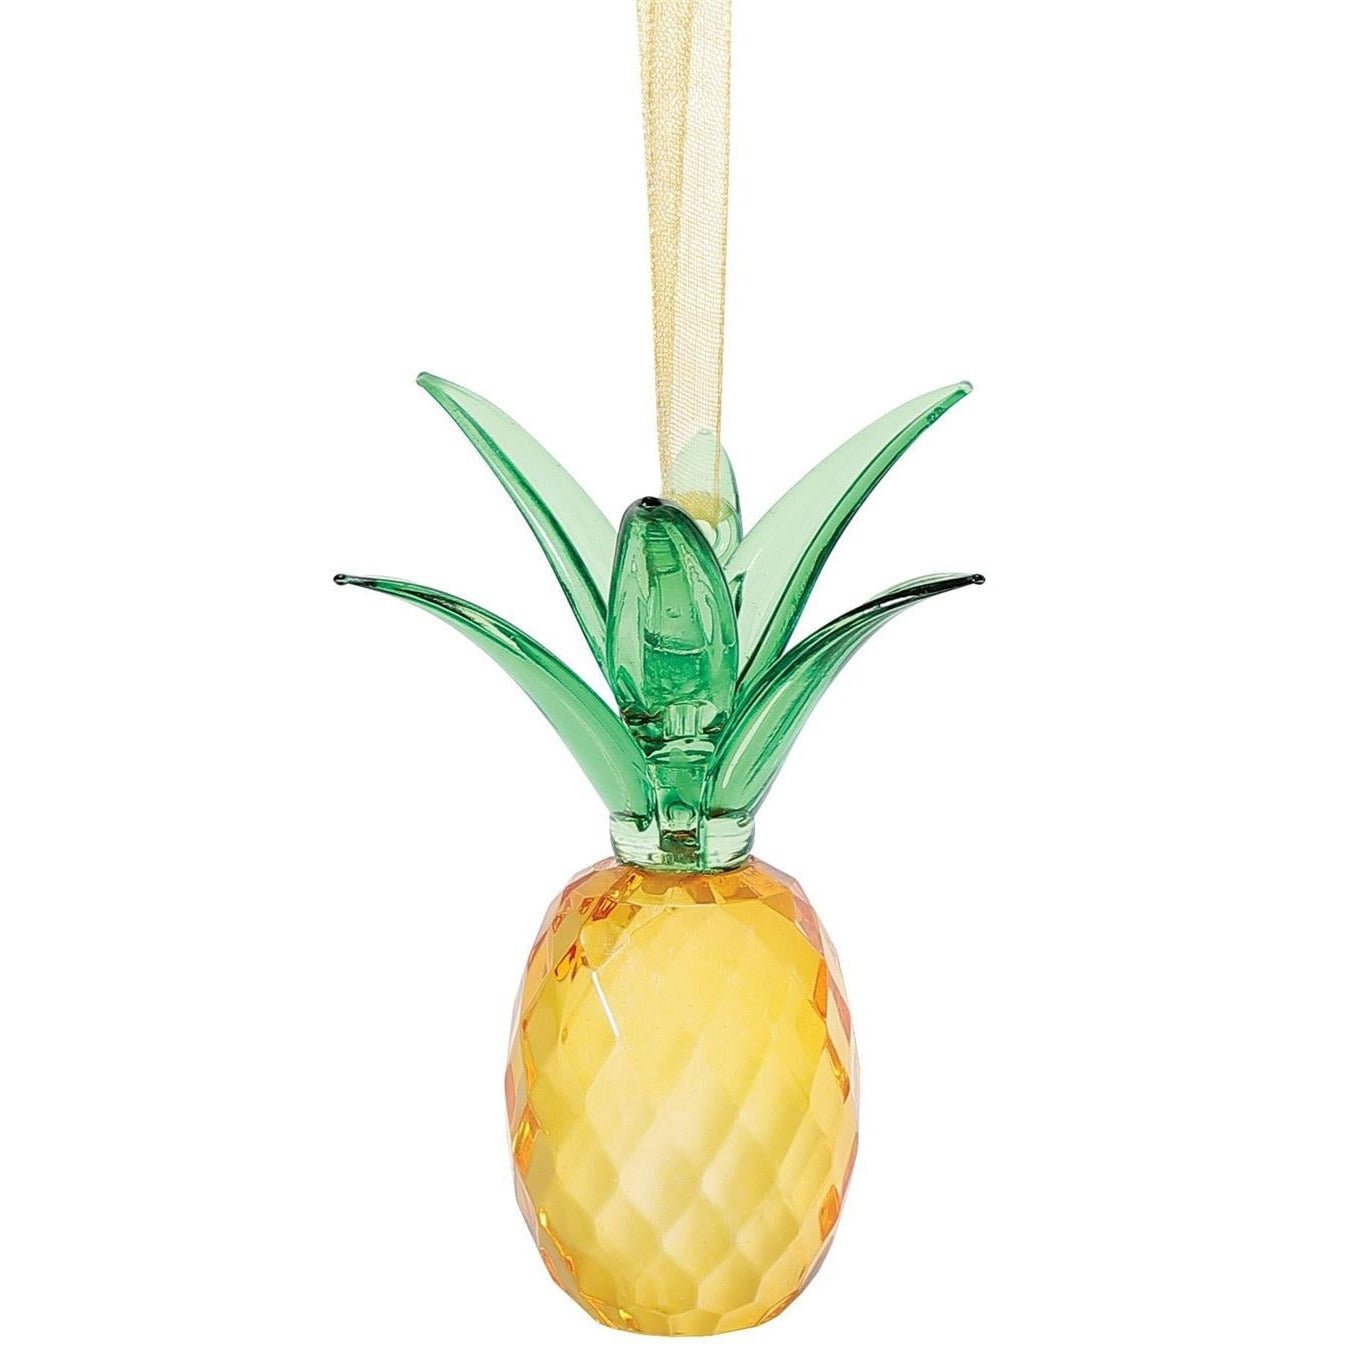 Facets Pineapple Ornament, 3.5"